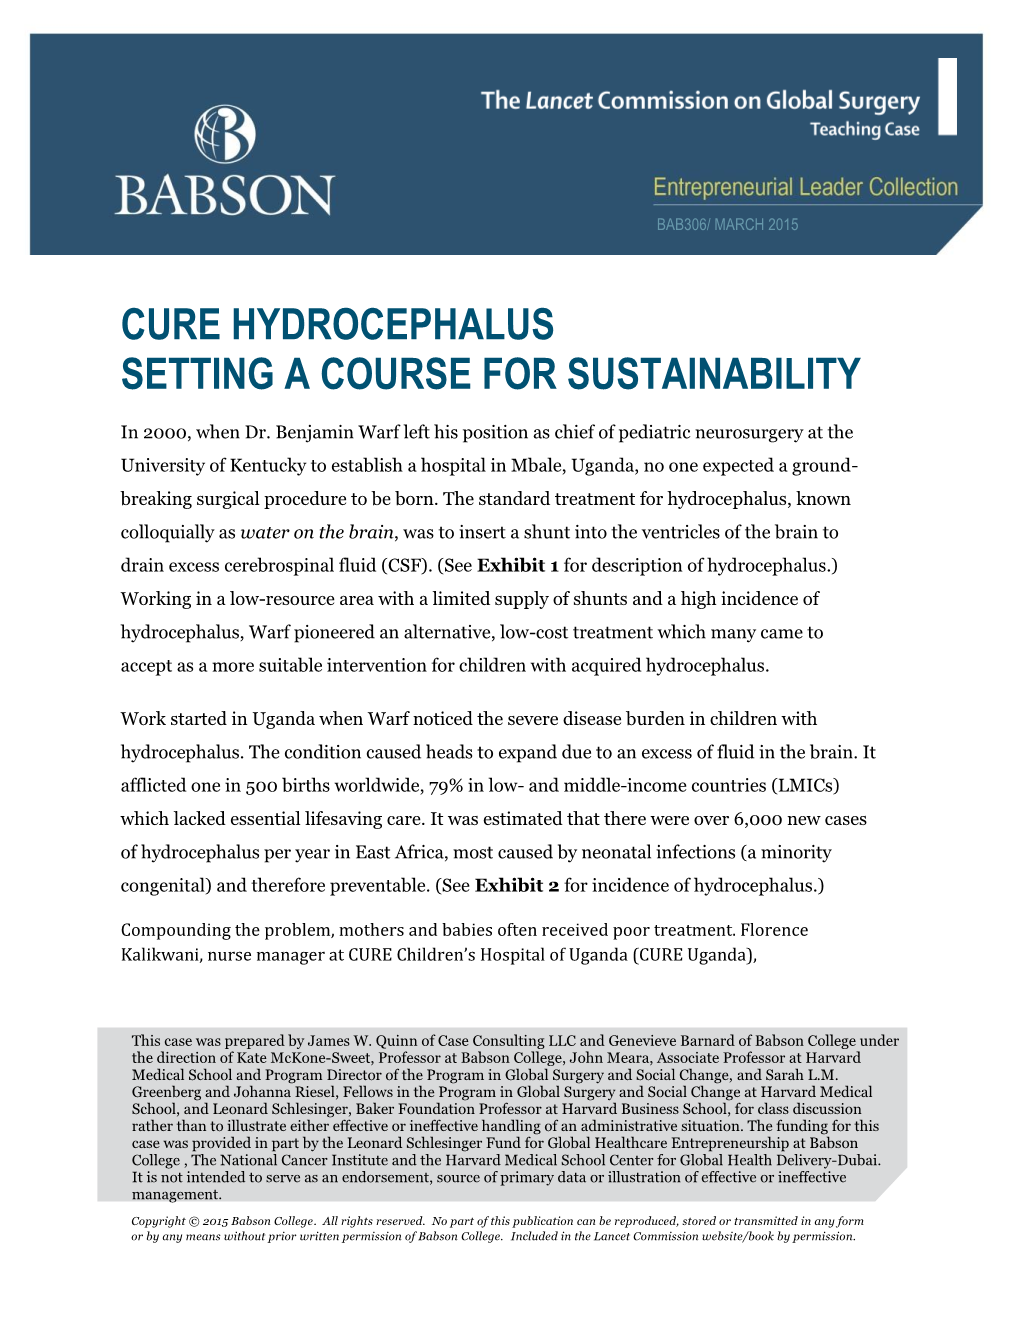 Cure Hydrocephalus Setting a Course for Sustainability